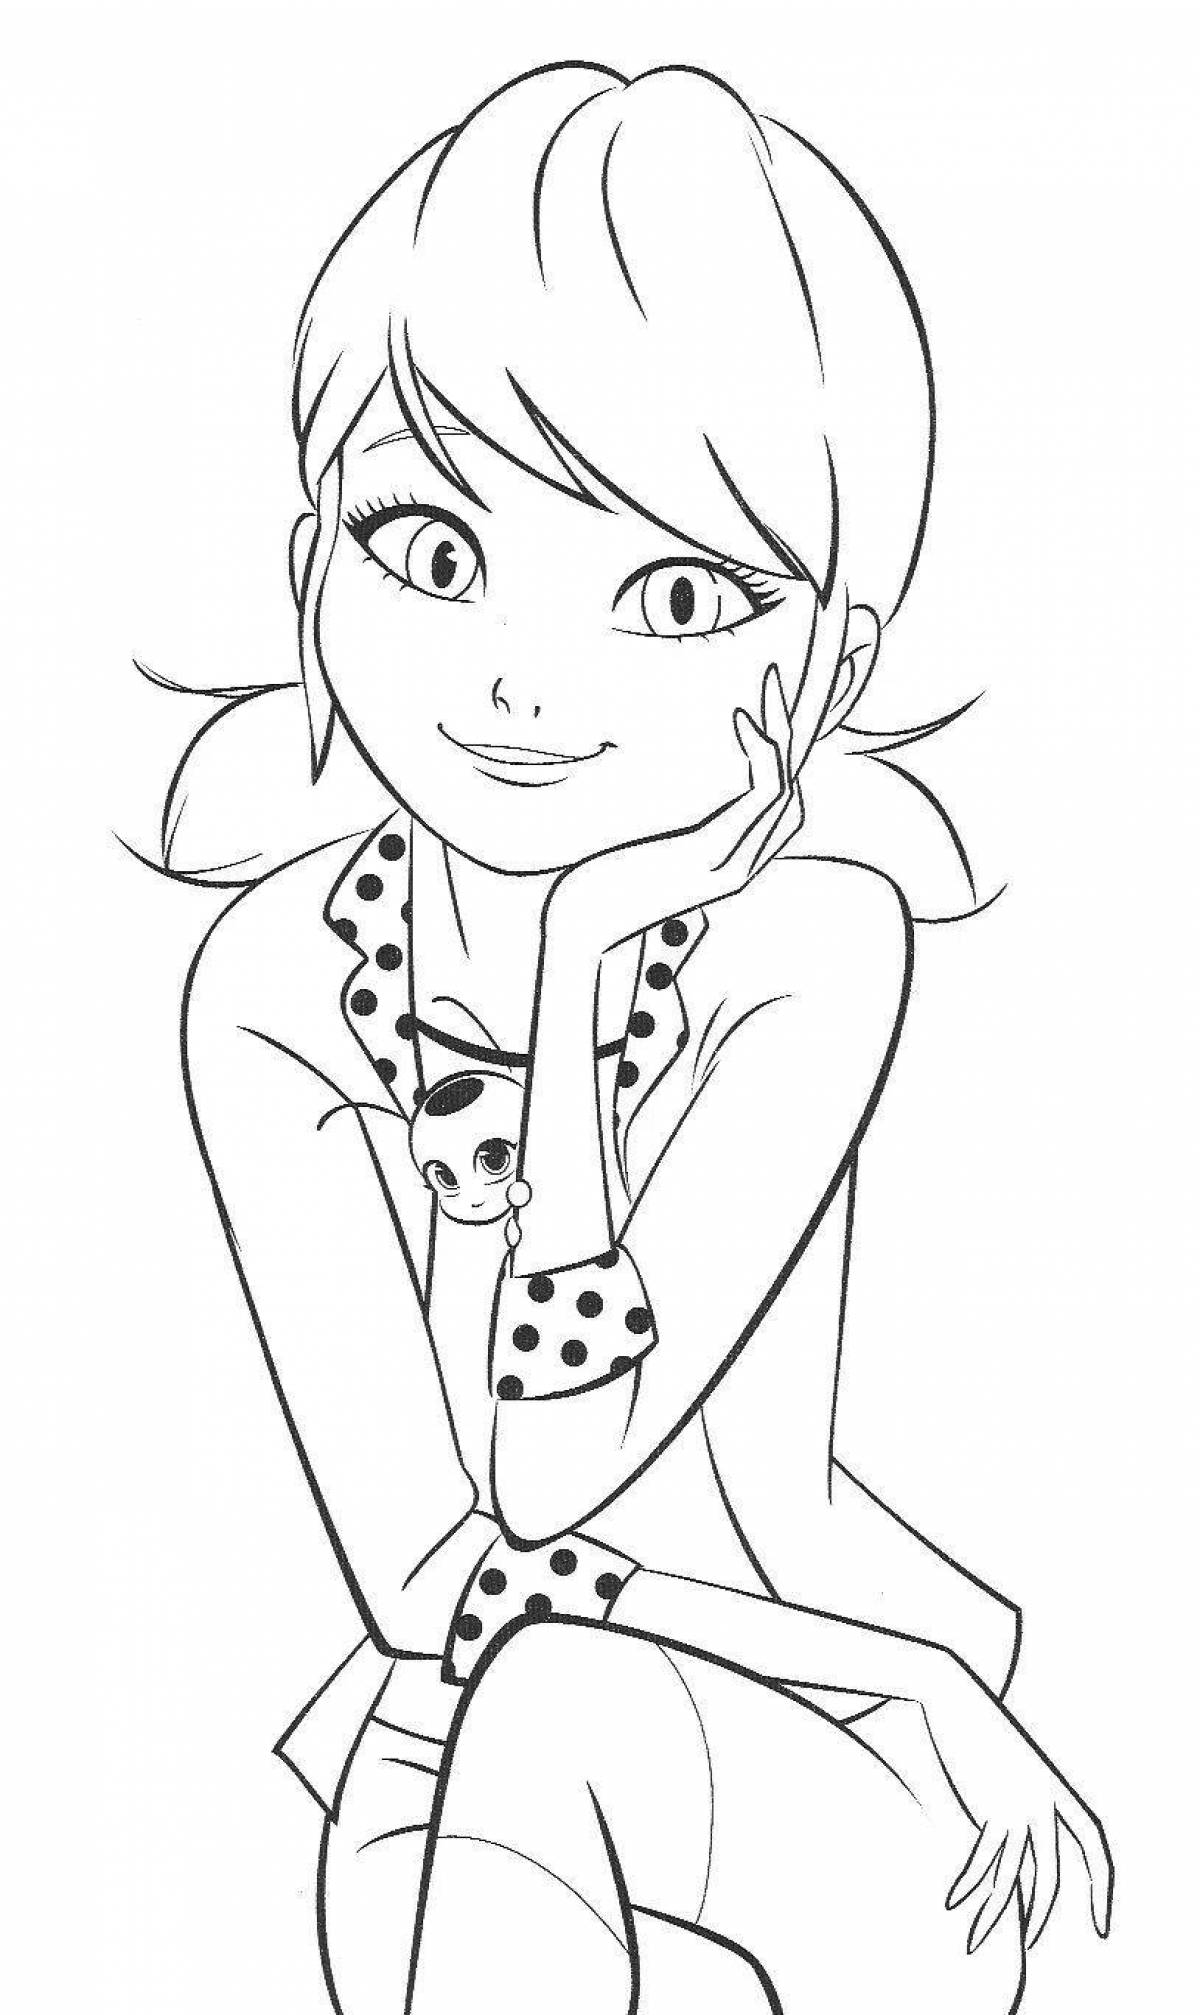 Marinette coloring book for kids